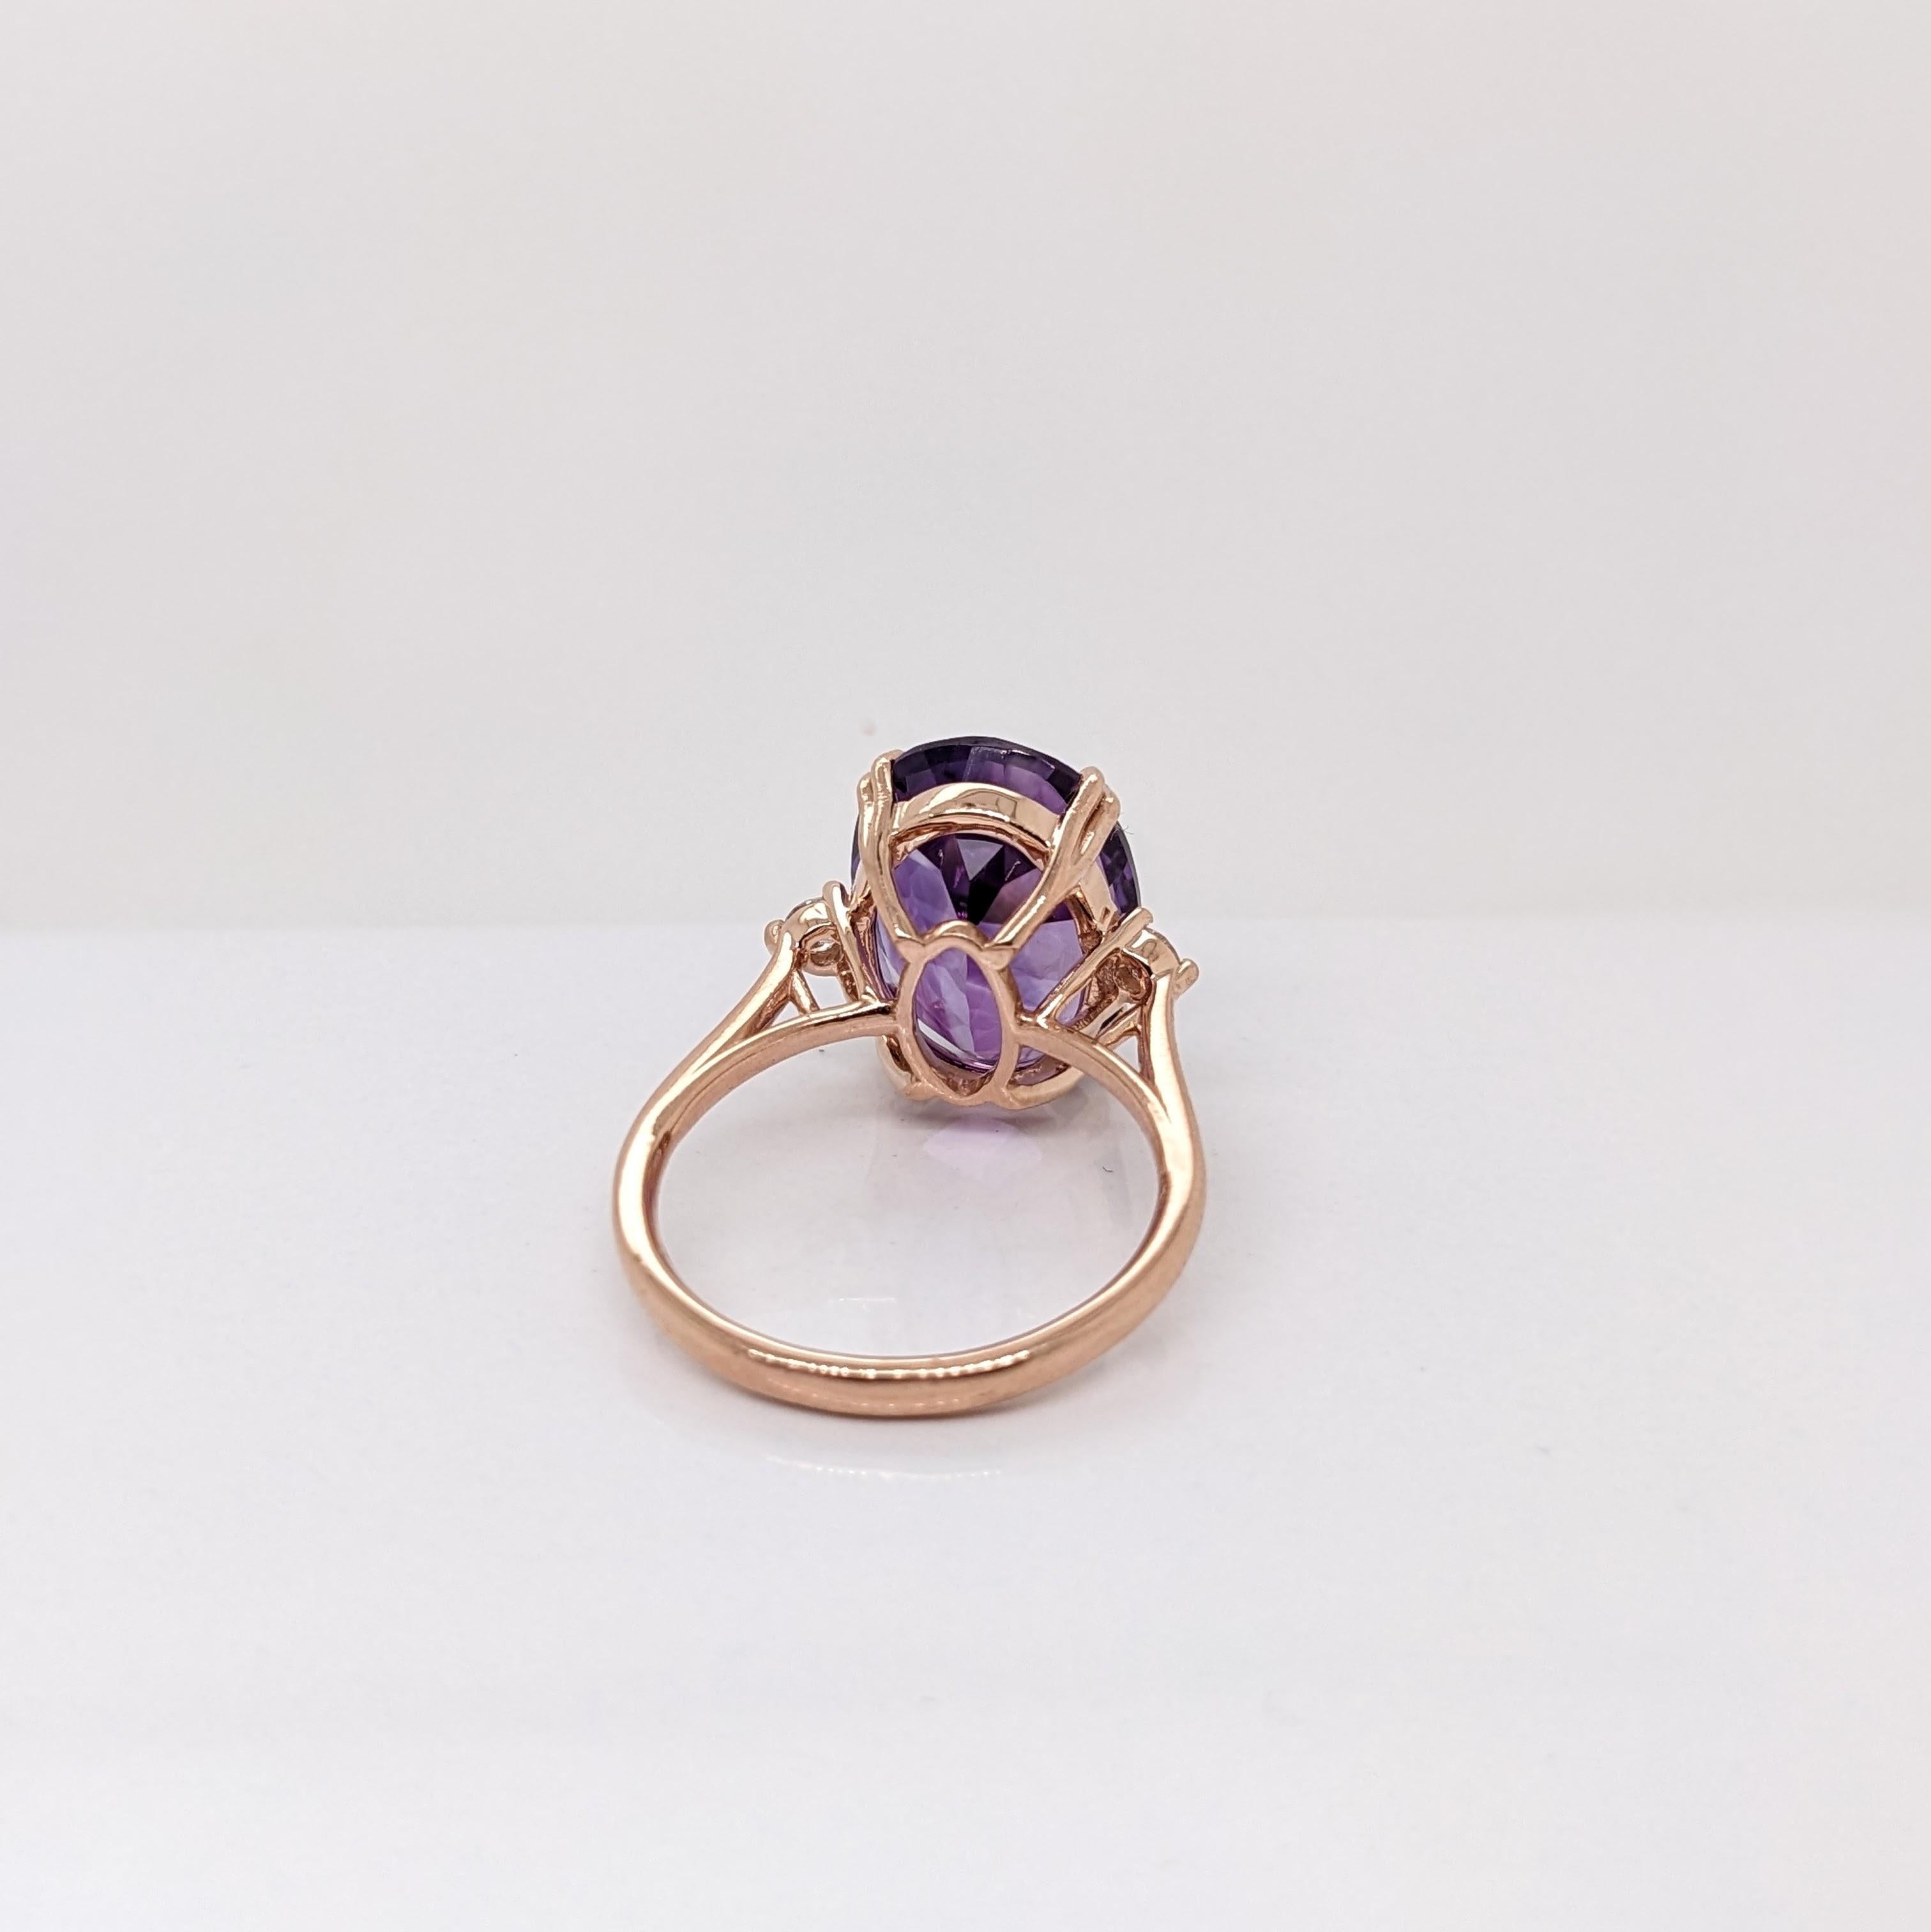 This beautiful ring features a 7.21 carat oval amethyst gemstone with natural earth mined diamonds, all set in solid 14K gold. This ring can be a lovely February birthstone gift for your loved ones! 

Specifications

Item Type: Ring
Center